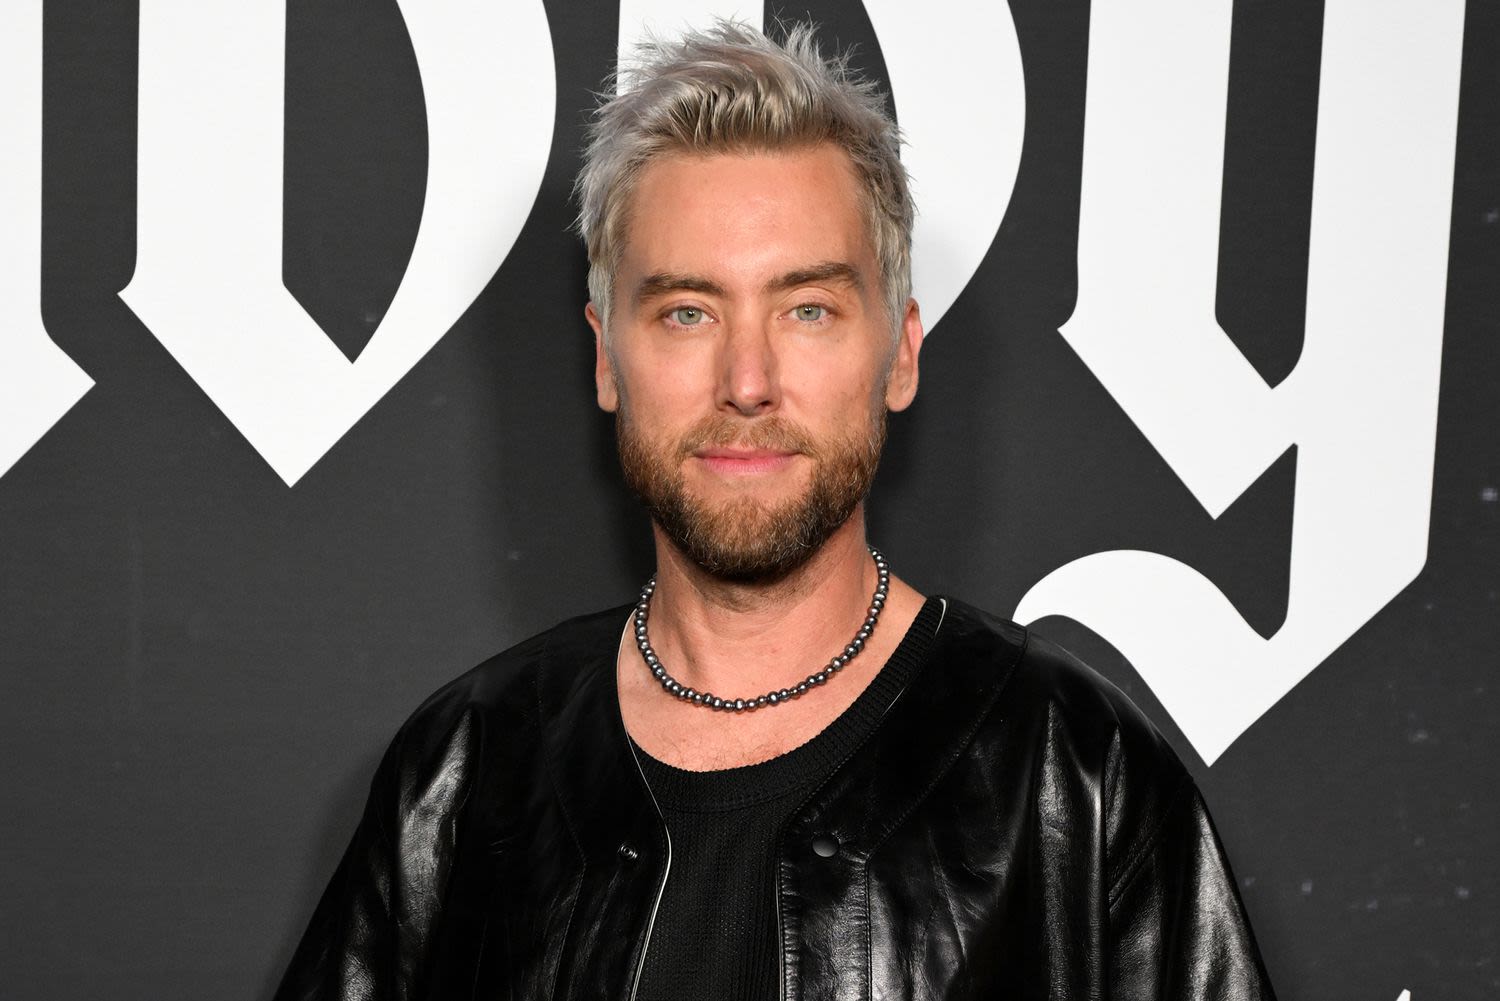 Lance Bass Reveals He Has Type 1.5 Diabetes: Here’s What That Means